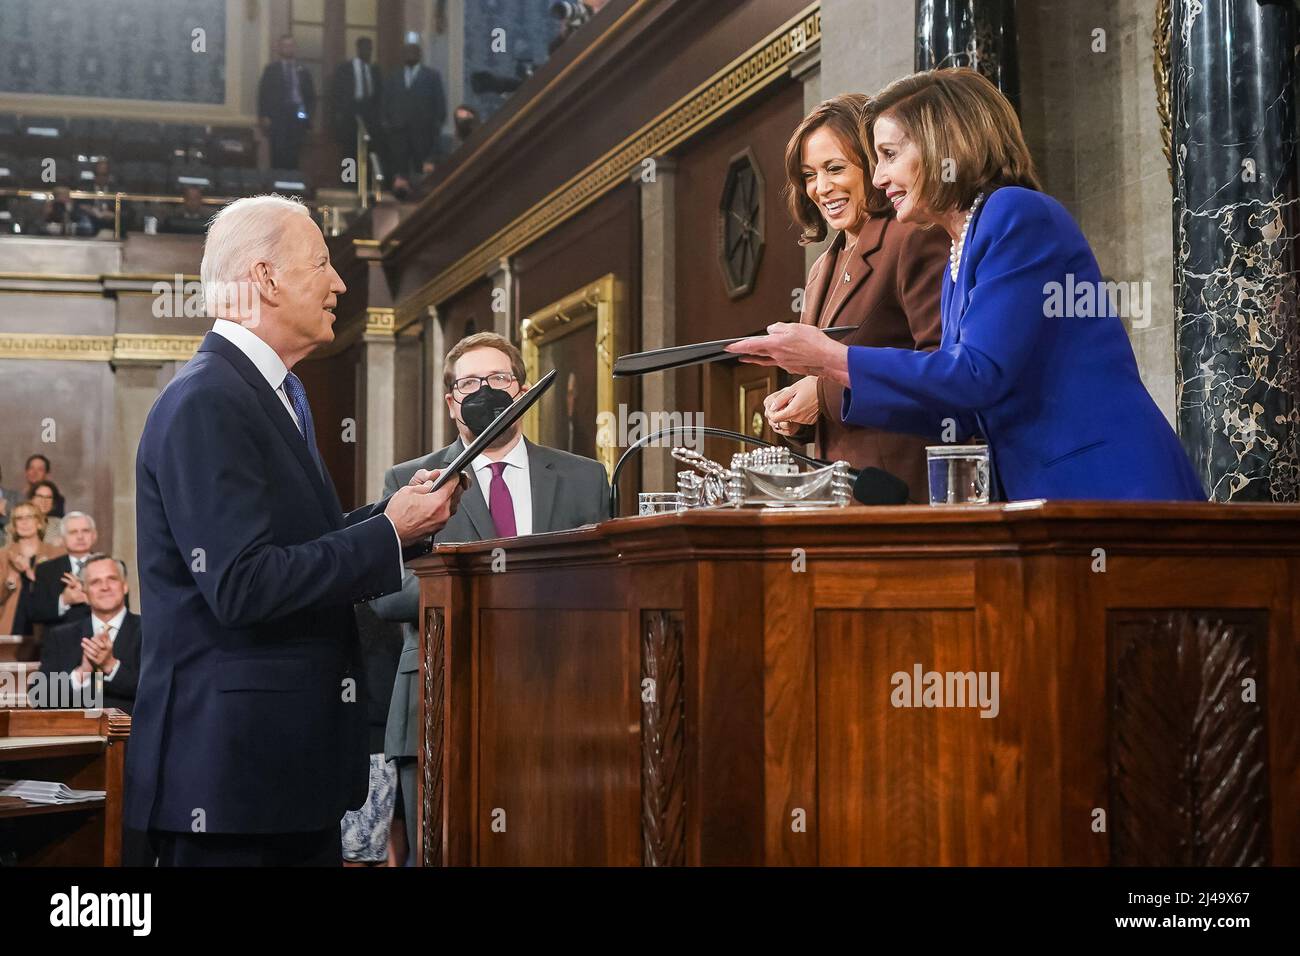 President Joe Biden presents copies of his speech to Vice President Kamala Harris and House Speaker Nancy Pelosi before delivering his State of the Union address to a joint session of Congress, Tuesday, March 1, 2022, in the House Chamber at the U.S. Capitol in Washington, D.C. (Official White House Photo by Lawrence Jackson) Stock Photo